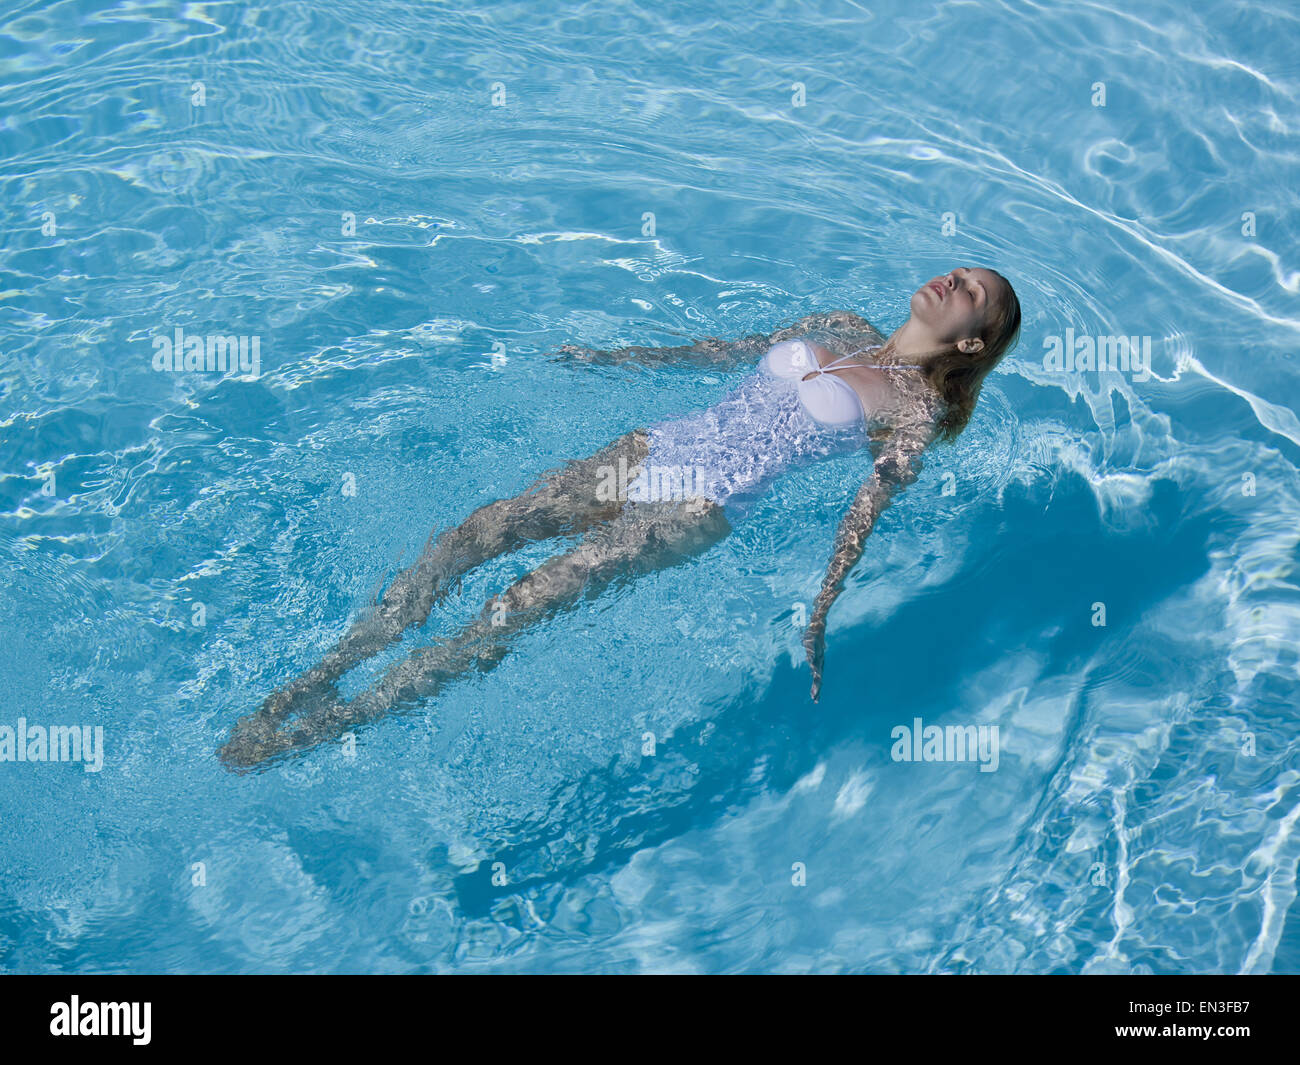 Woman floating in pool Stock Photo